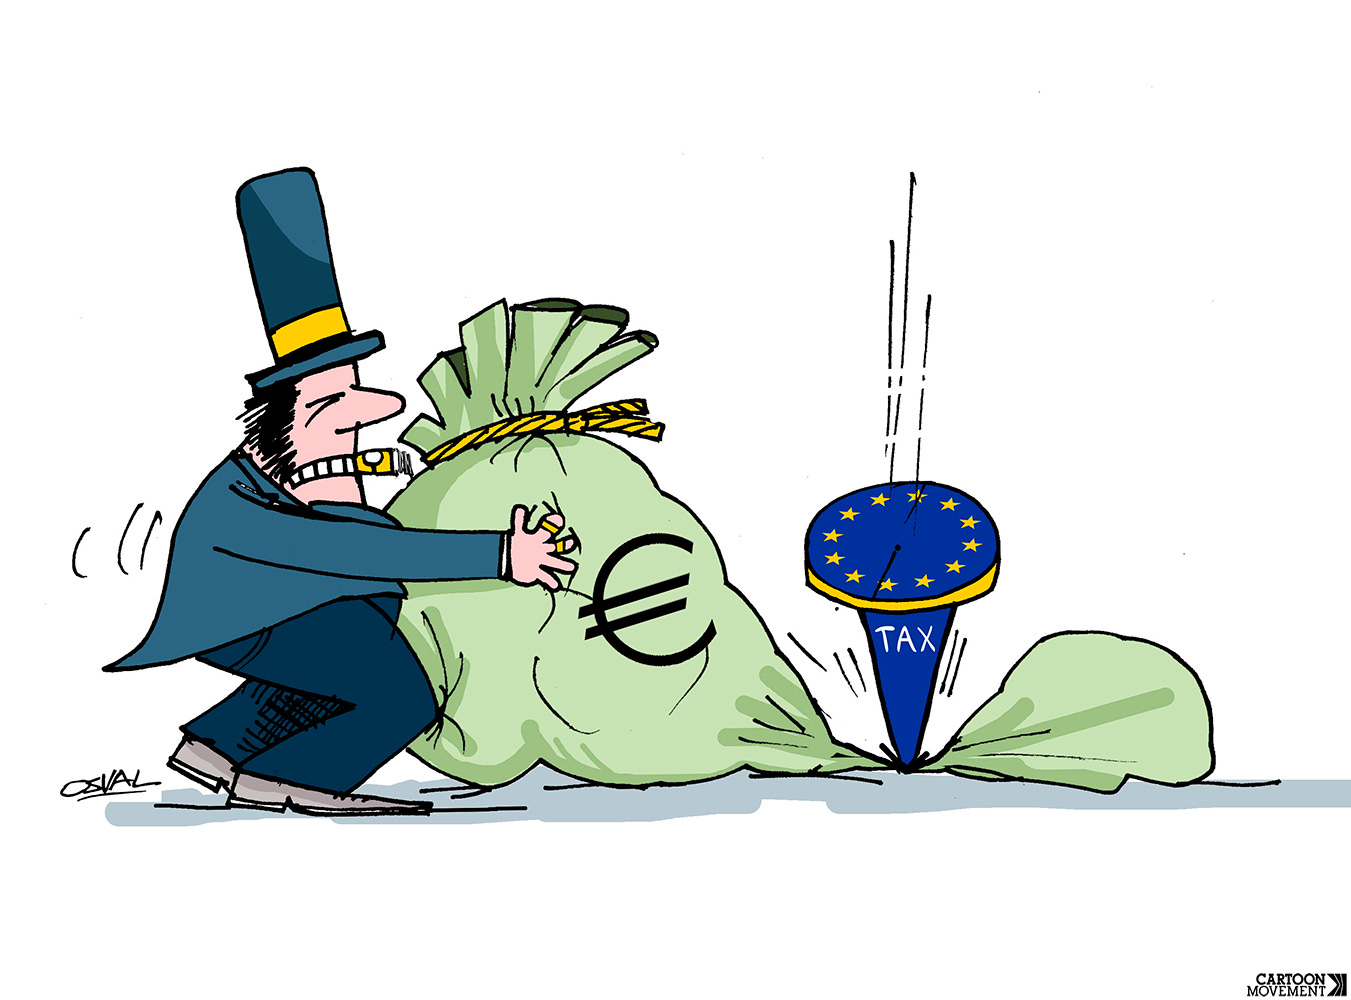 Cartoon showing a rich man dragging a bag of money, A giant pin with the word ‘tax’ on it and the EU logo drops out of the sky to pin down the money bag in such a way that about a third of it cannot be dragged away.